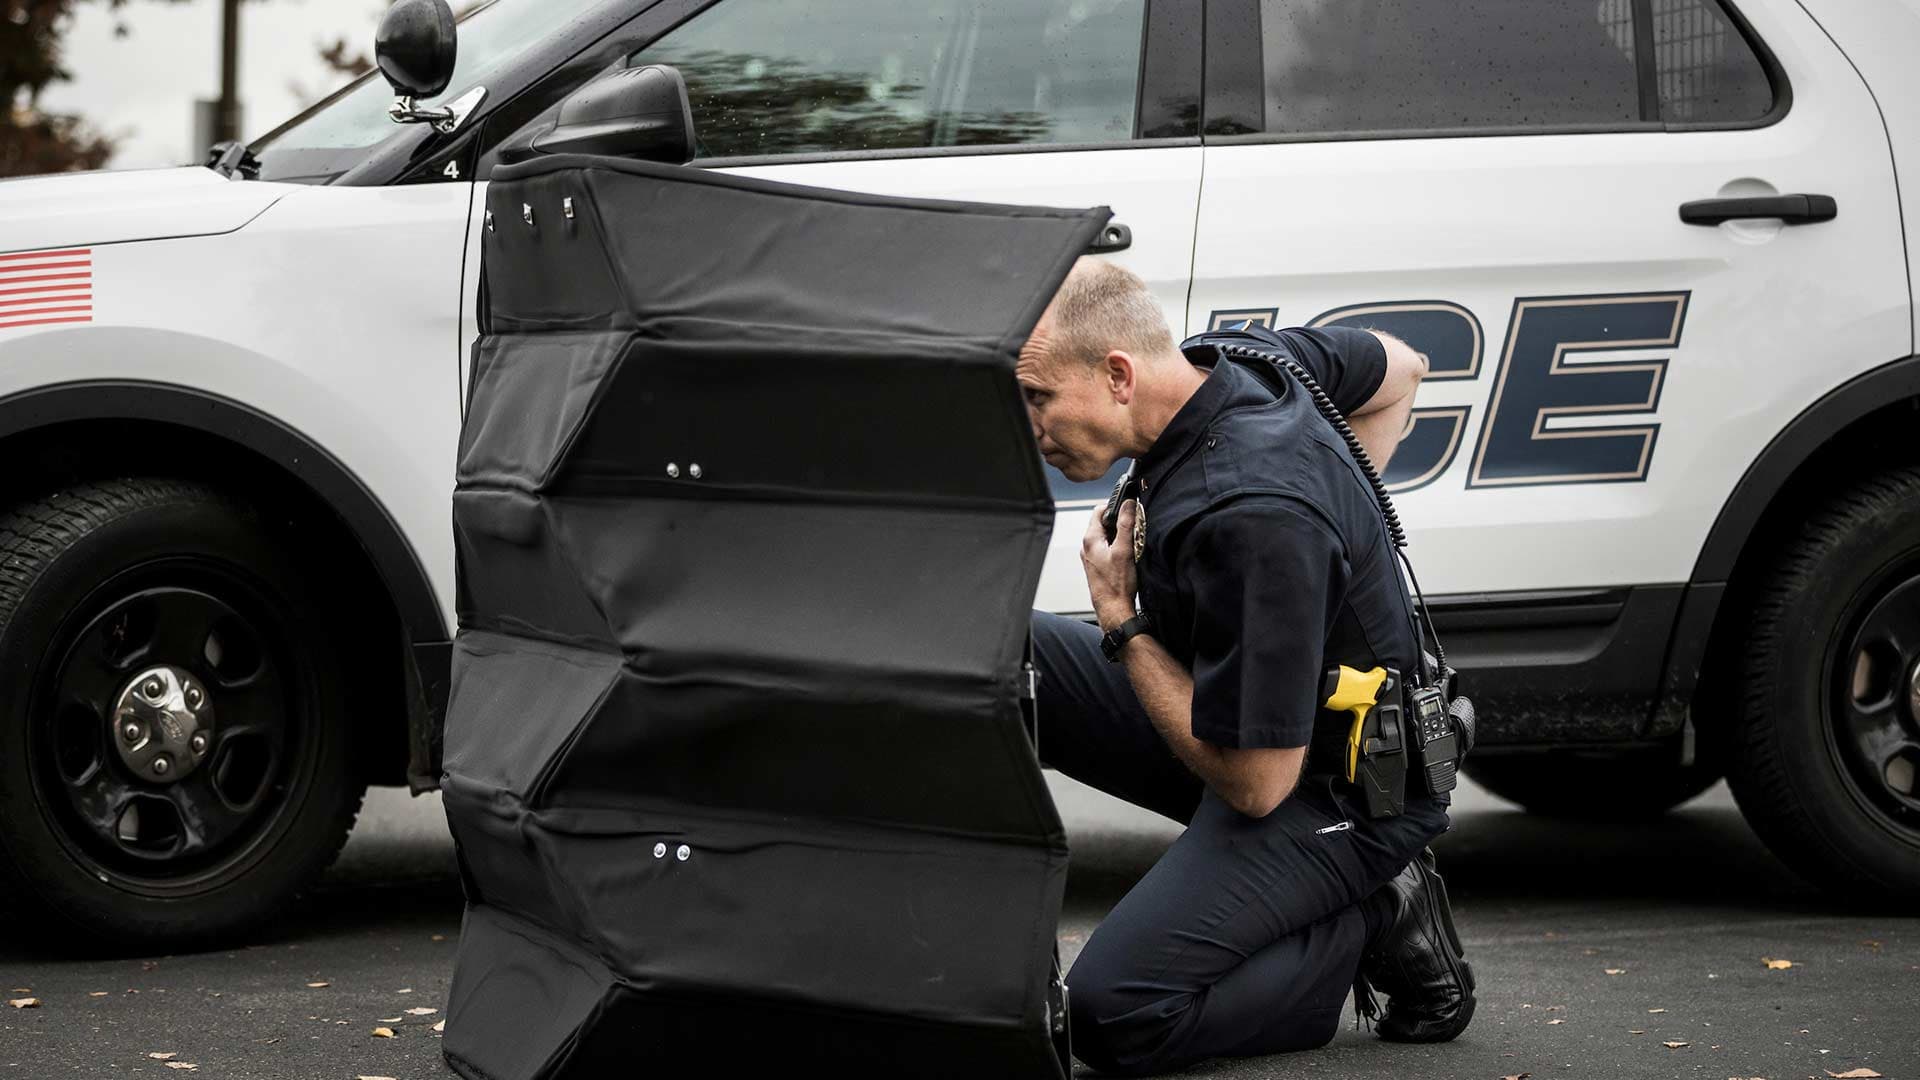 New Kevlar Shield Is Designed to Protect Police Officers